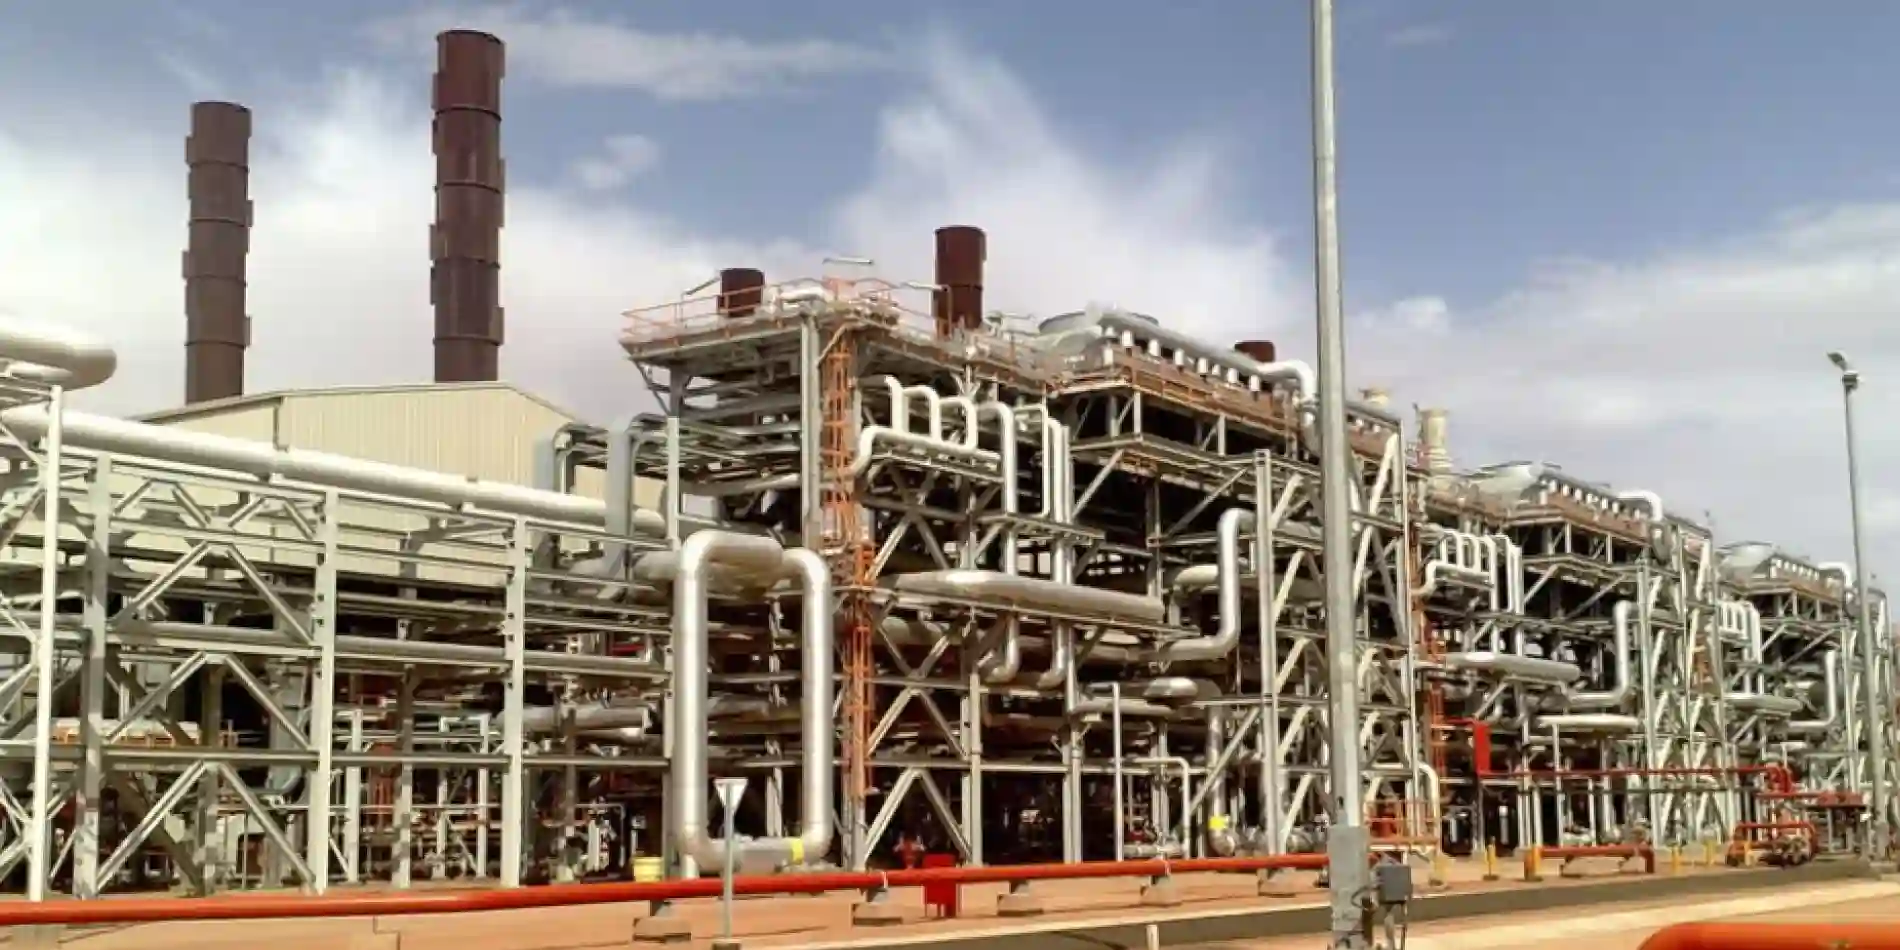 oil & gas processing plant | steel structures | concrete foundations